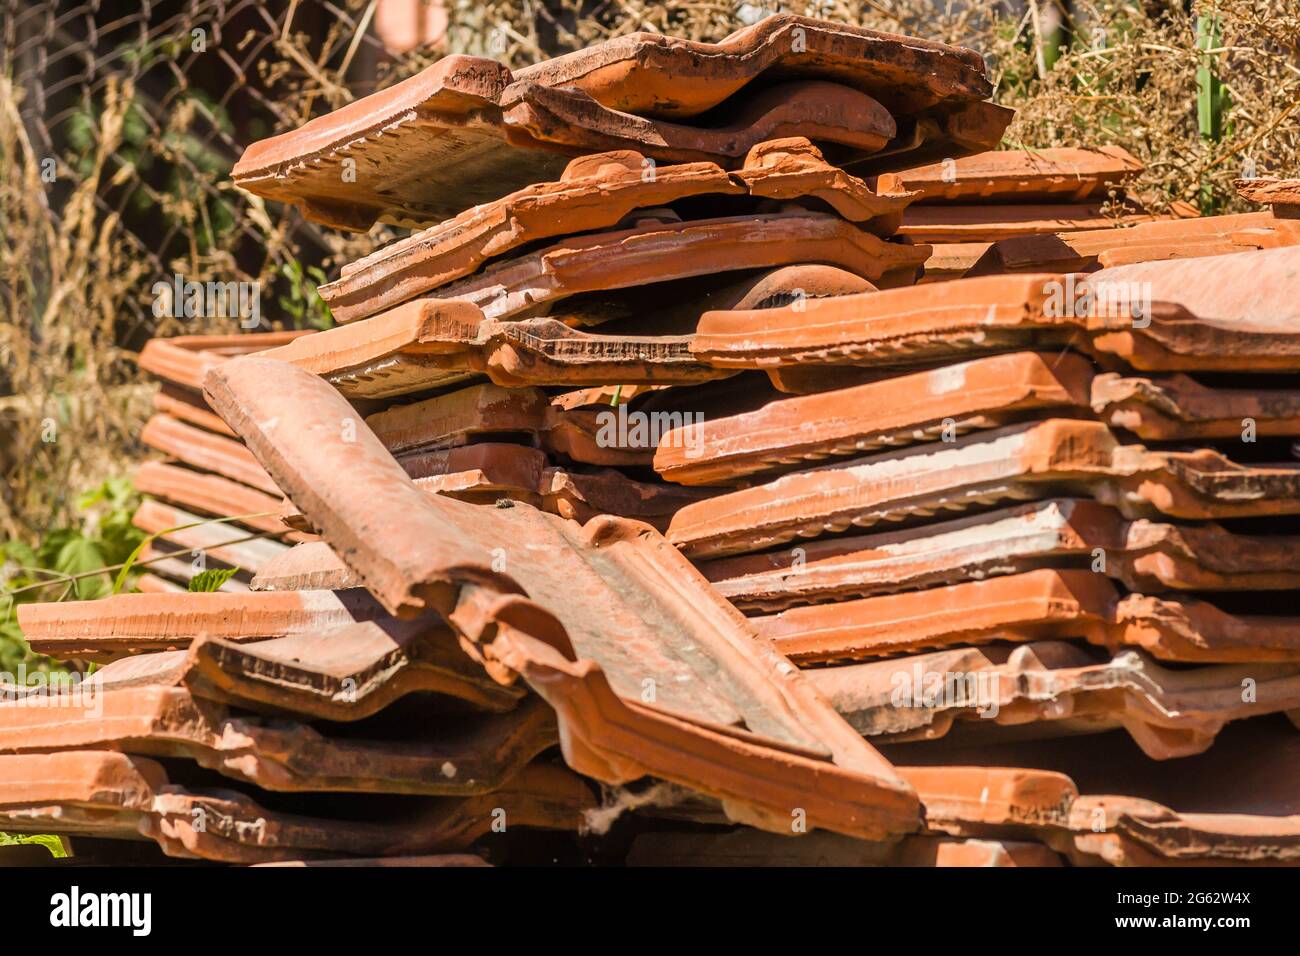 A pile of old tiles, removed from the roof of the house. Stock Photo